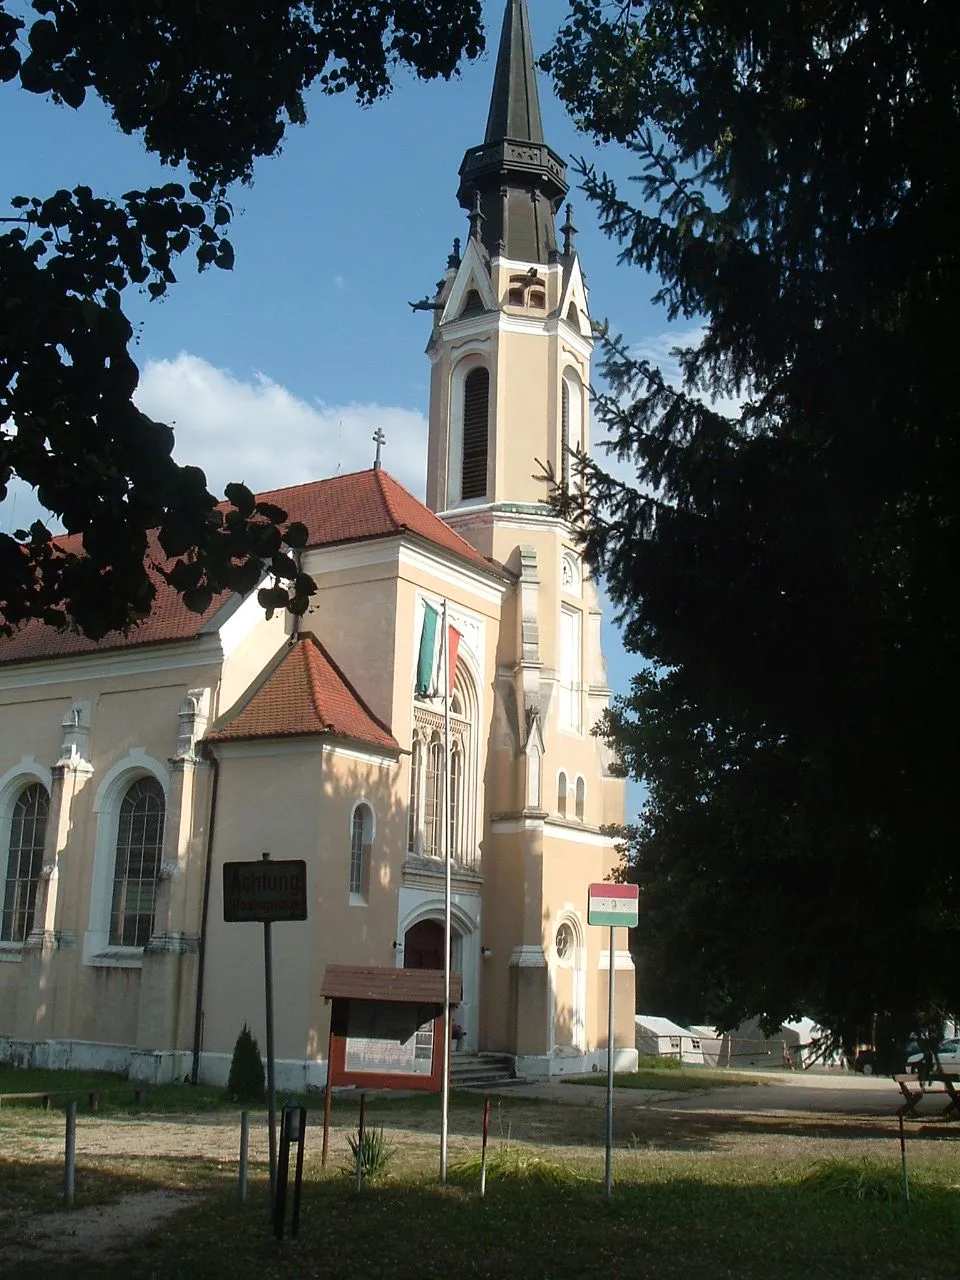 Photo showing: The Szent Imre Church in Rönök, by the austrian-hungarian frontier.